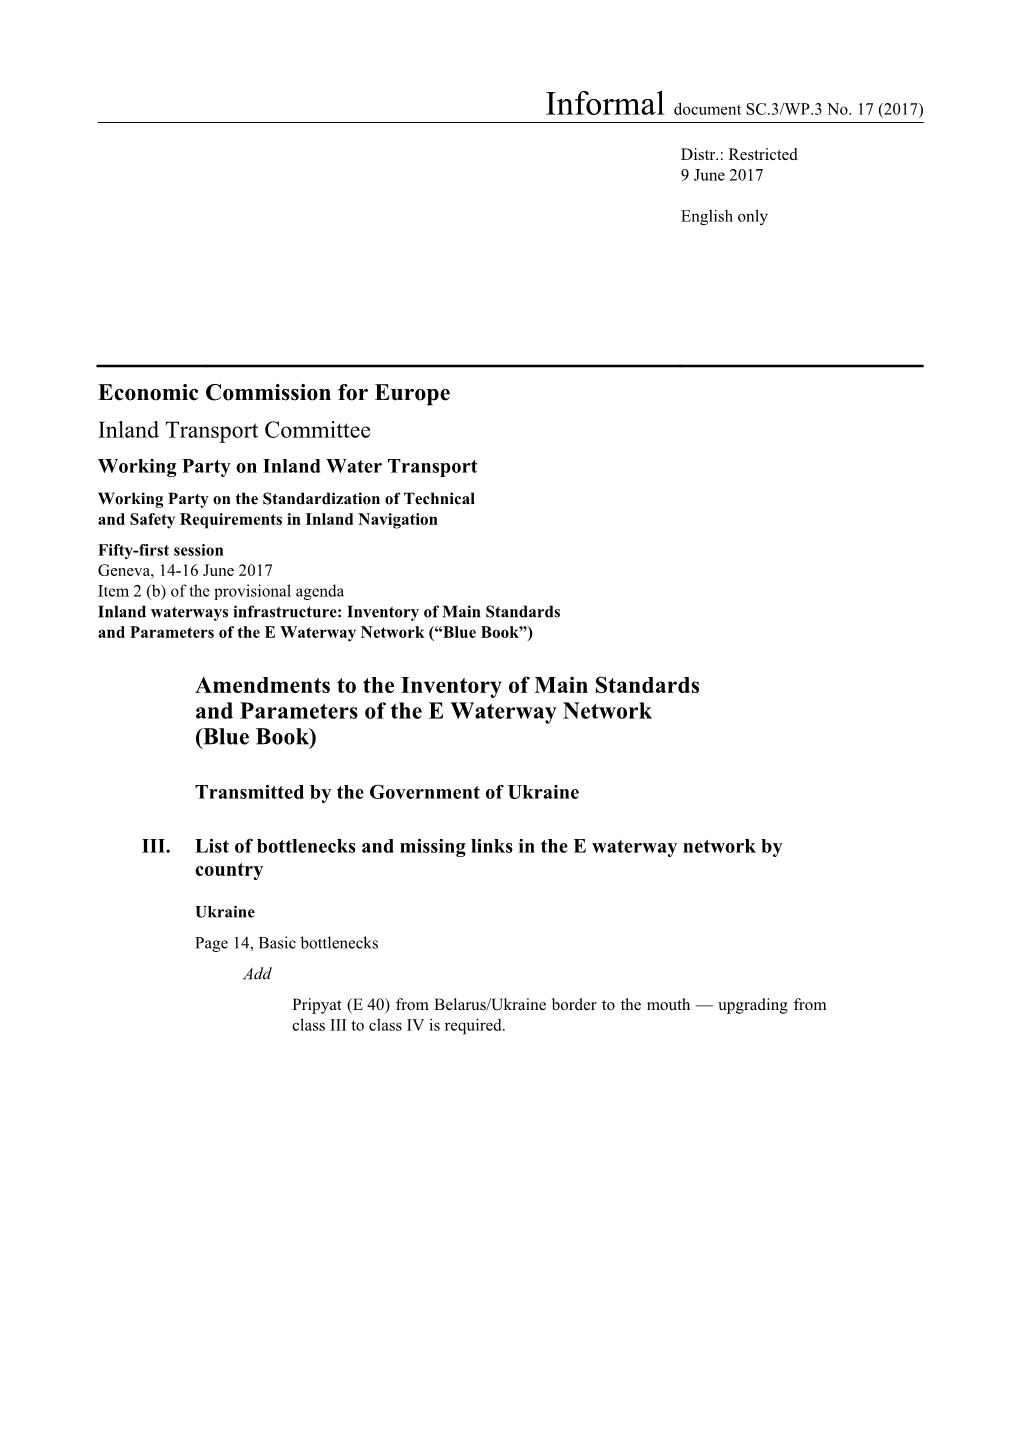 Economic Commission for Europe Inland Transport Committee